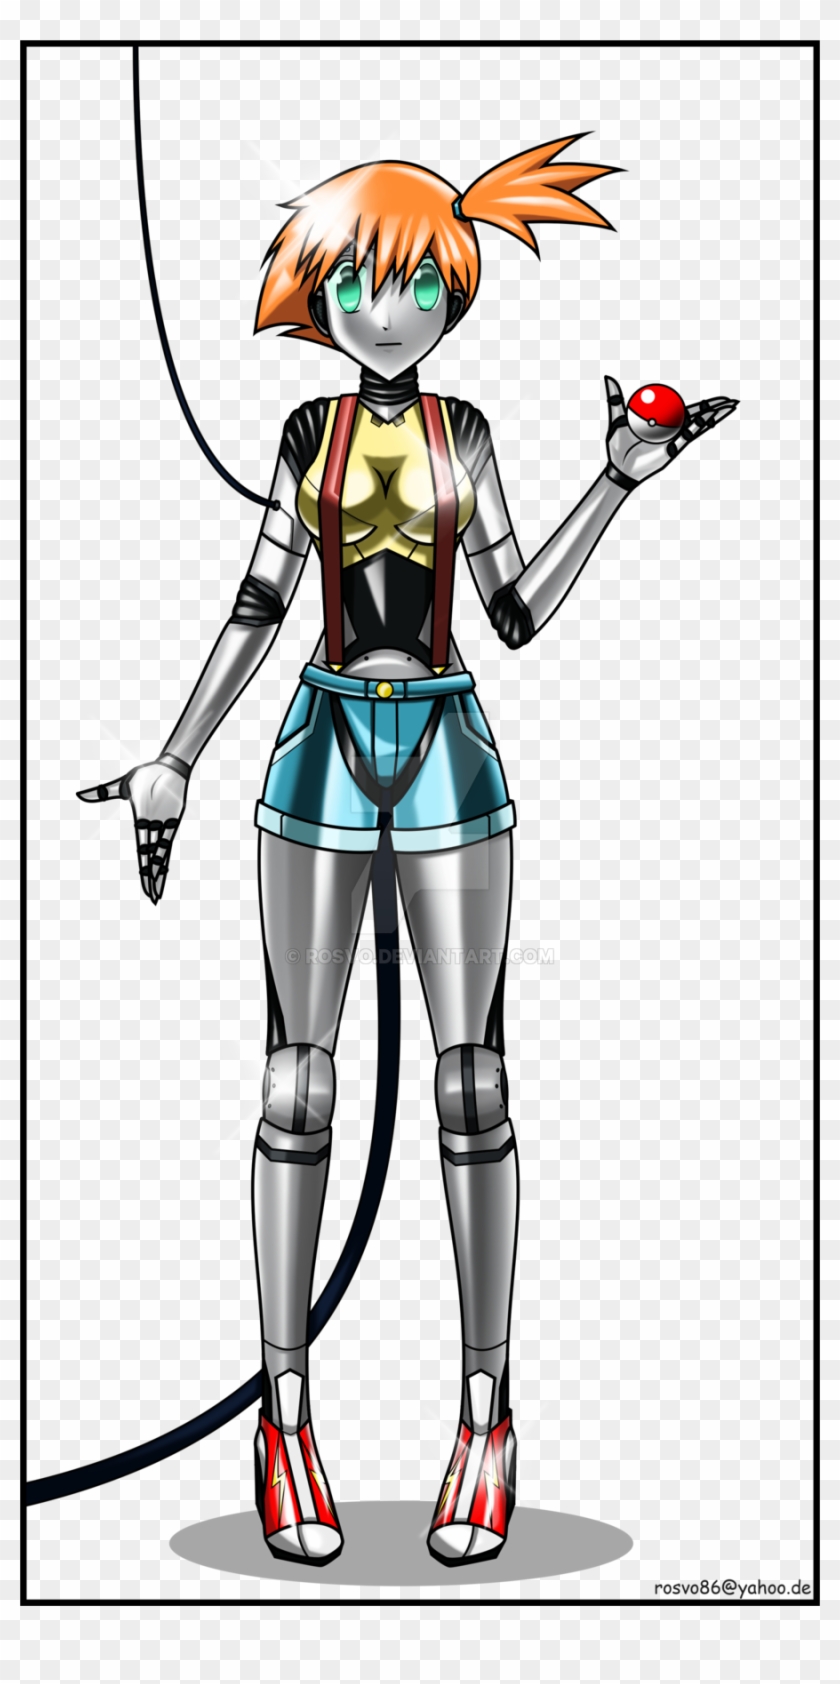 Robot Misty By Rosvo Robot Misty By Rosvo Pokemon Robot Misty Free Transparent Png Clipart Images Download